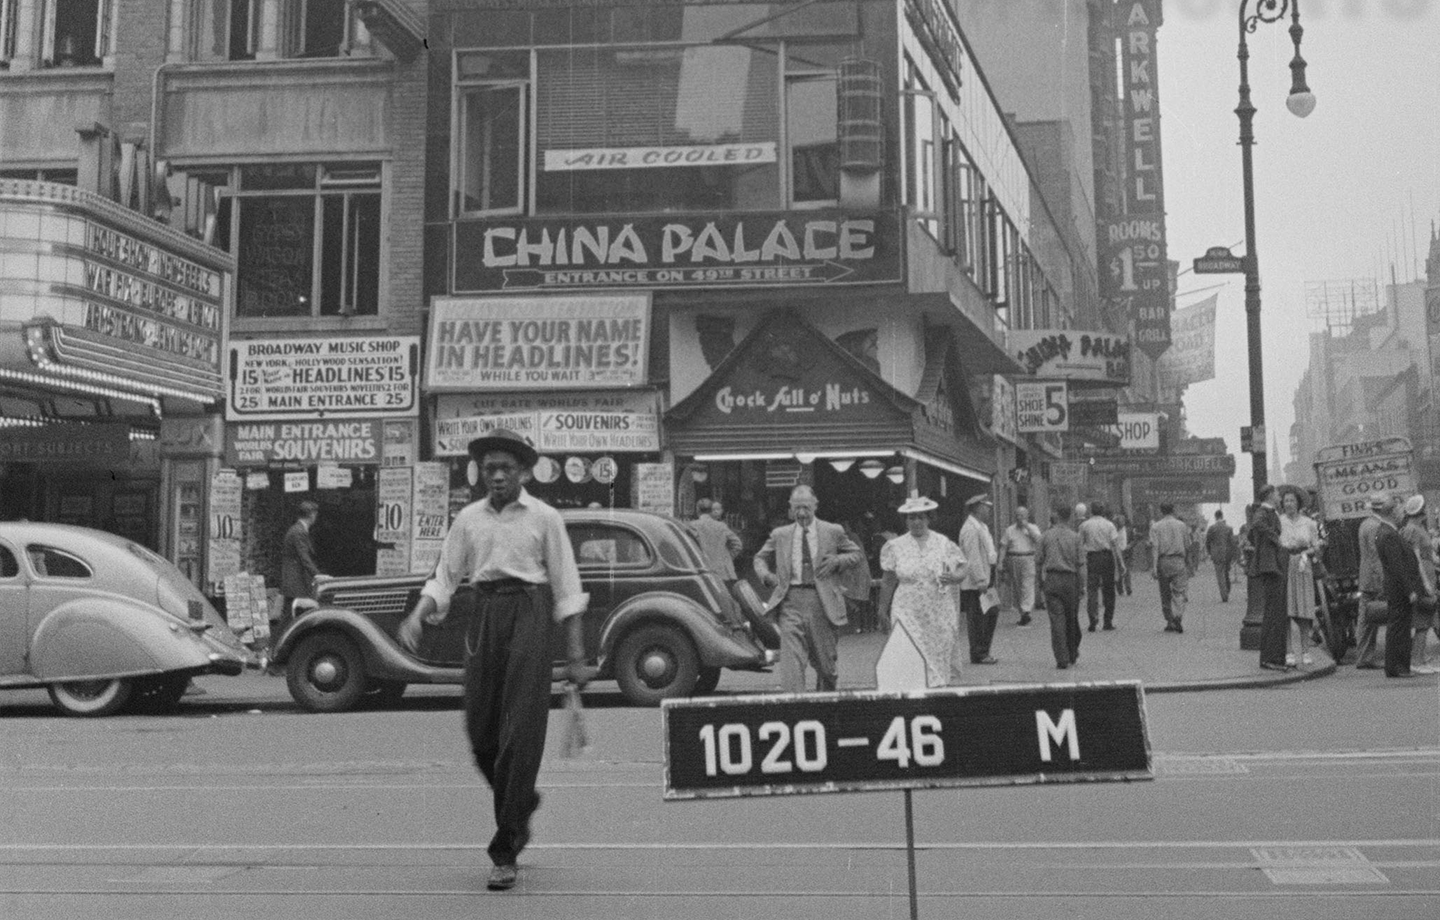 Historic photo of Manhattan, store signs in the background.
                                           